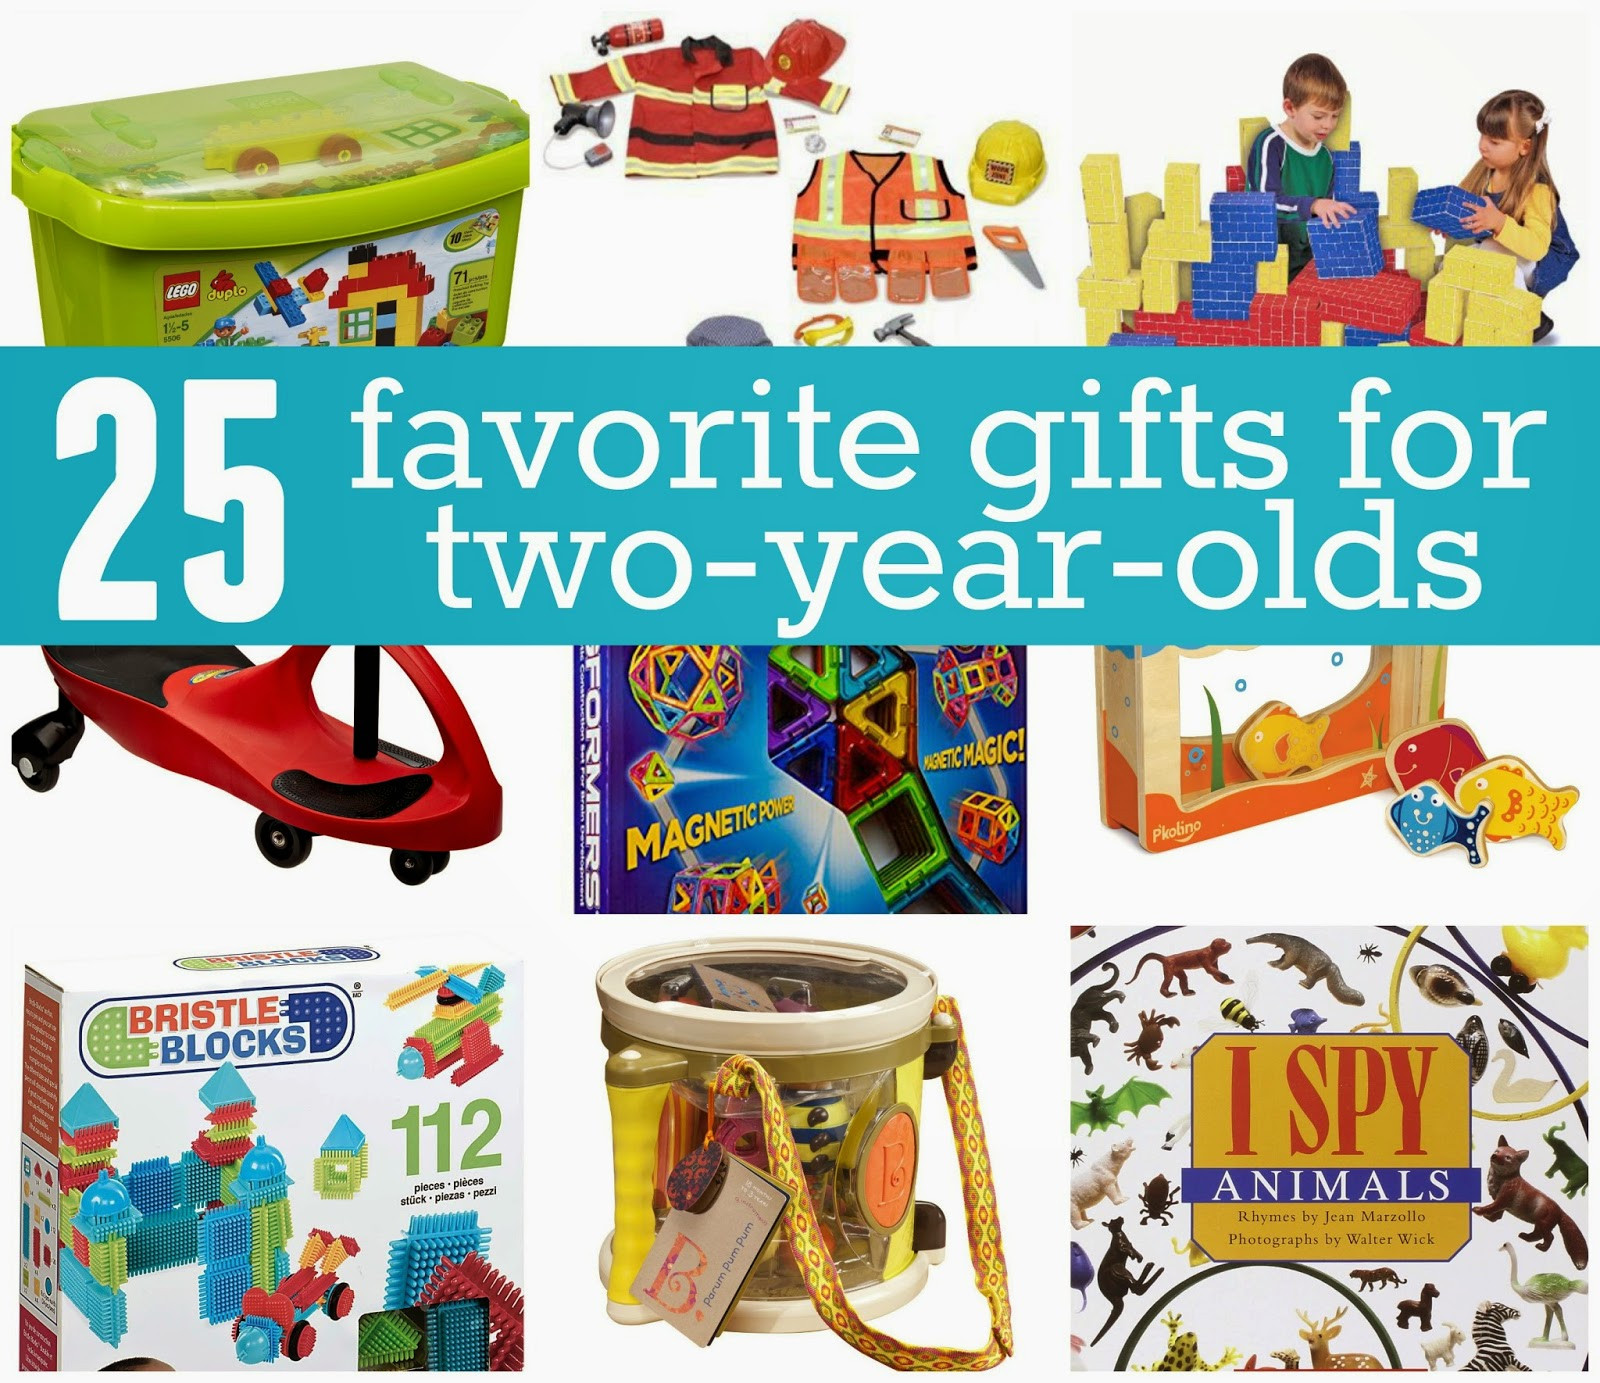 Best Gift Ideas For A 2 Year Old
 Toddler Approved Favorite Gifts for 2 Year Olds